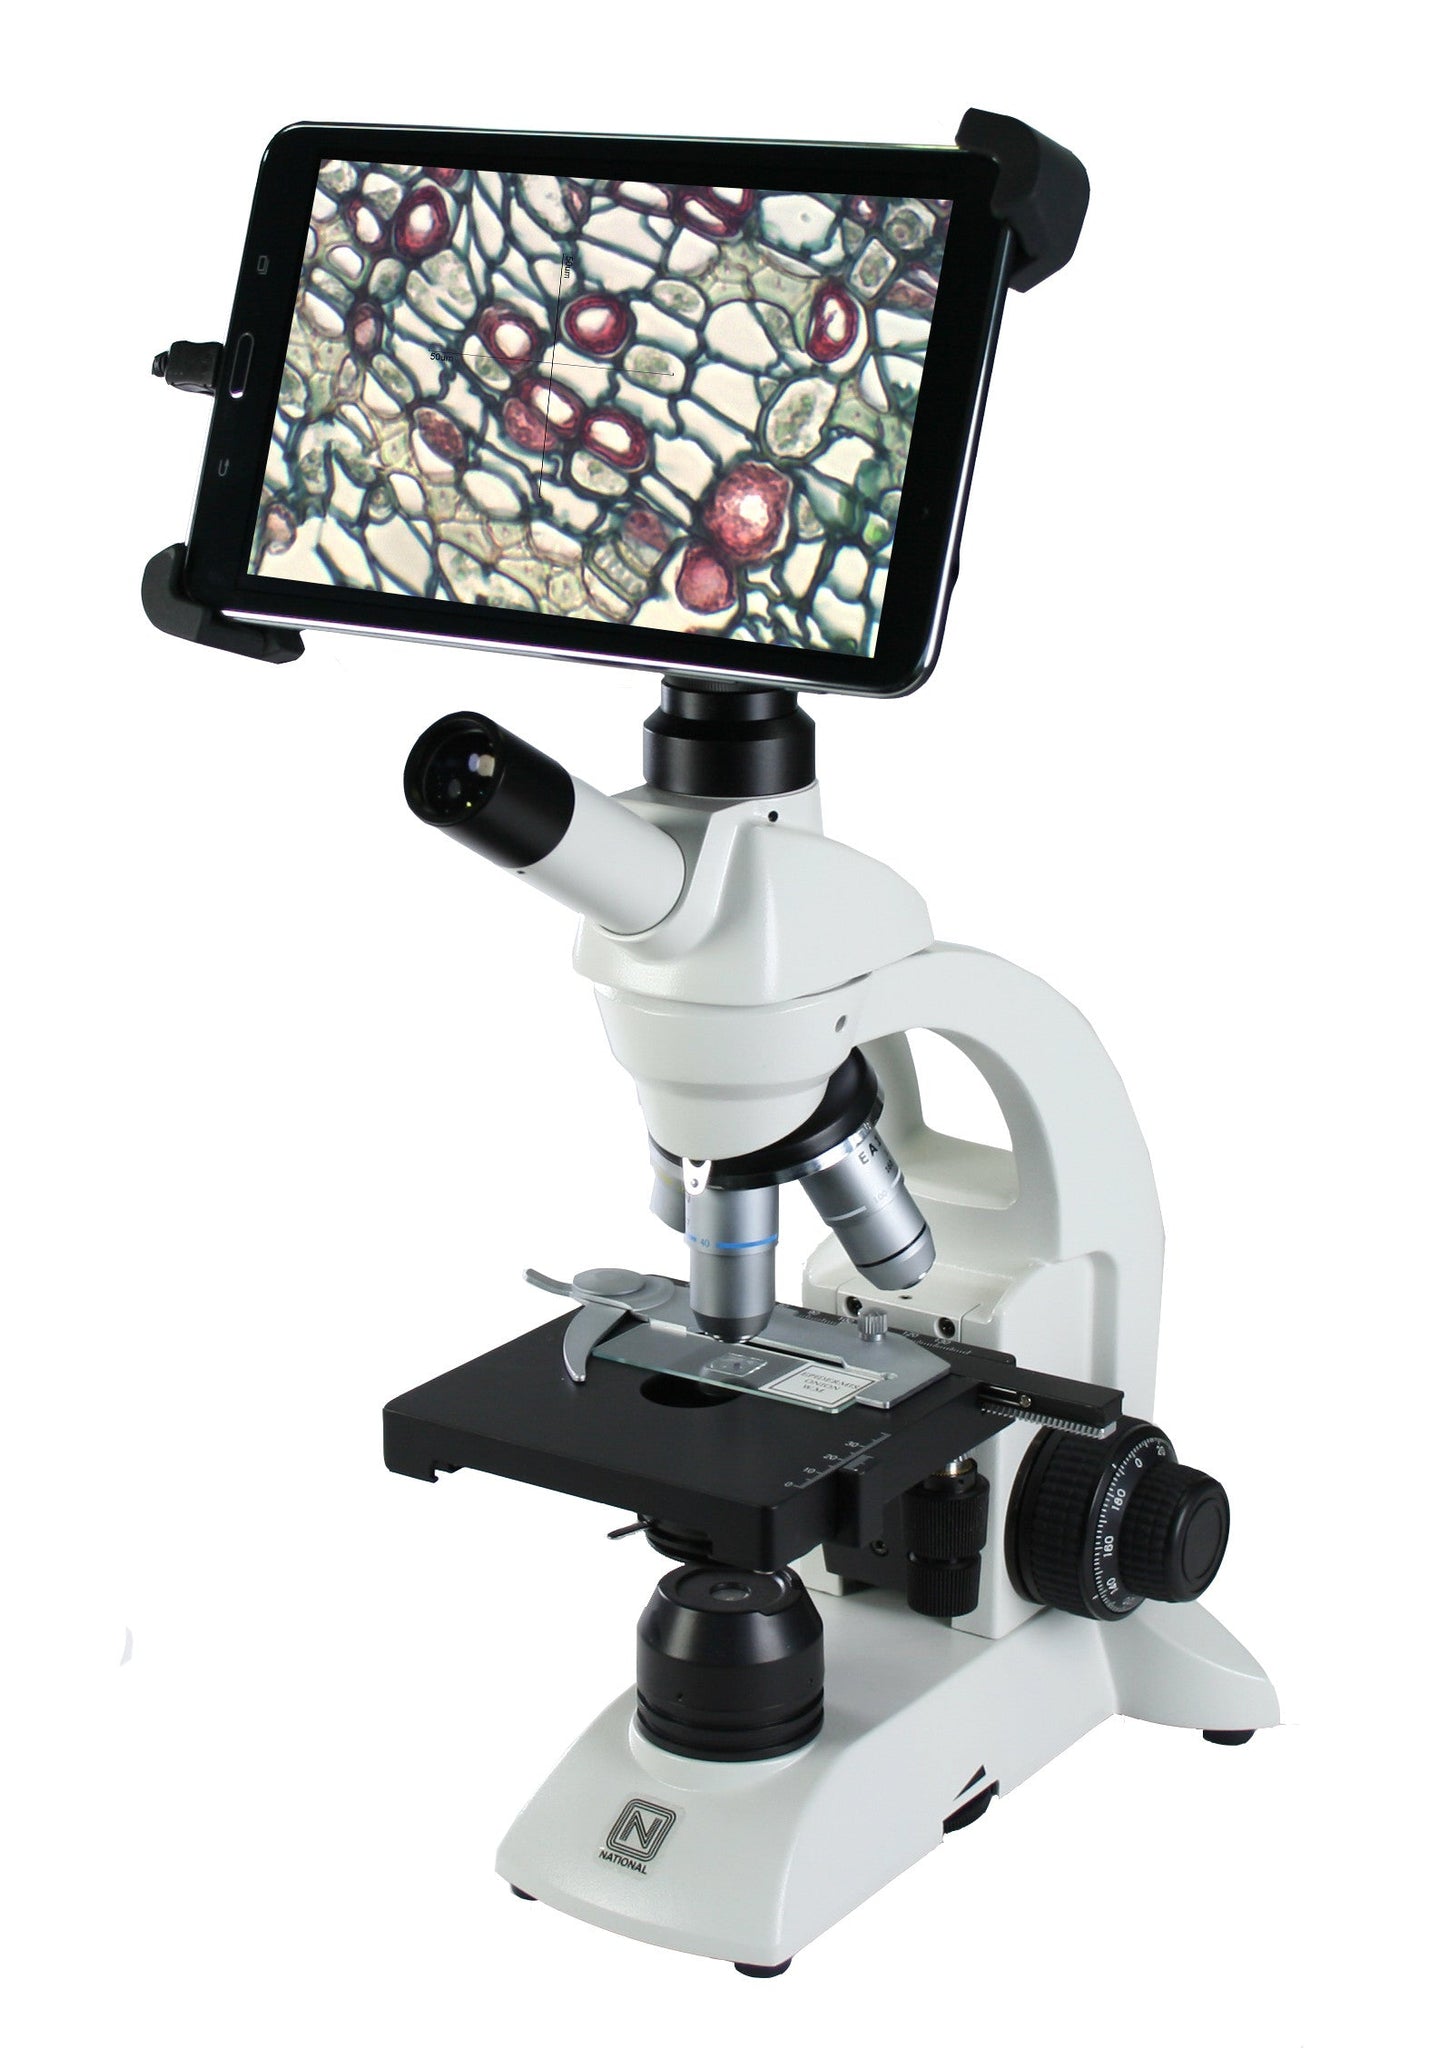 National BTW1-214-RLED - LED Microscope with Detachable Tablet